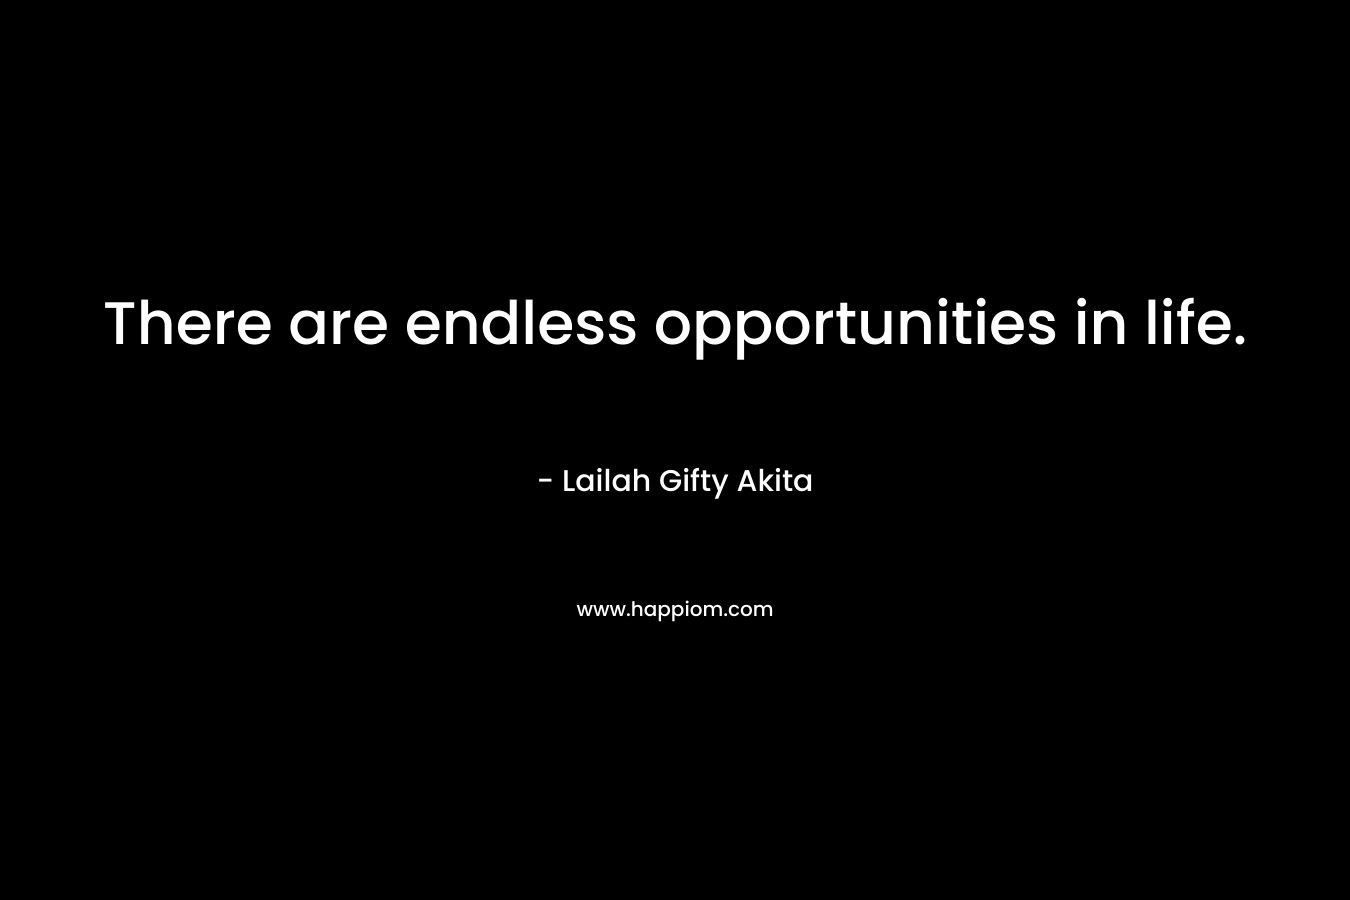 There are endless opportunities in life.